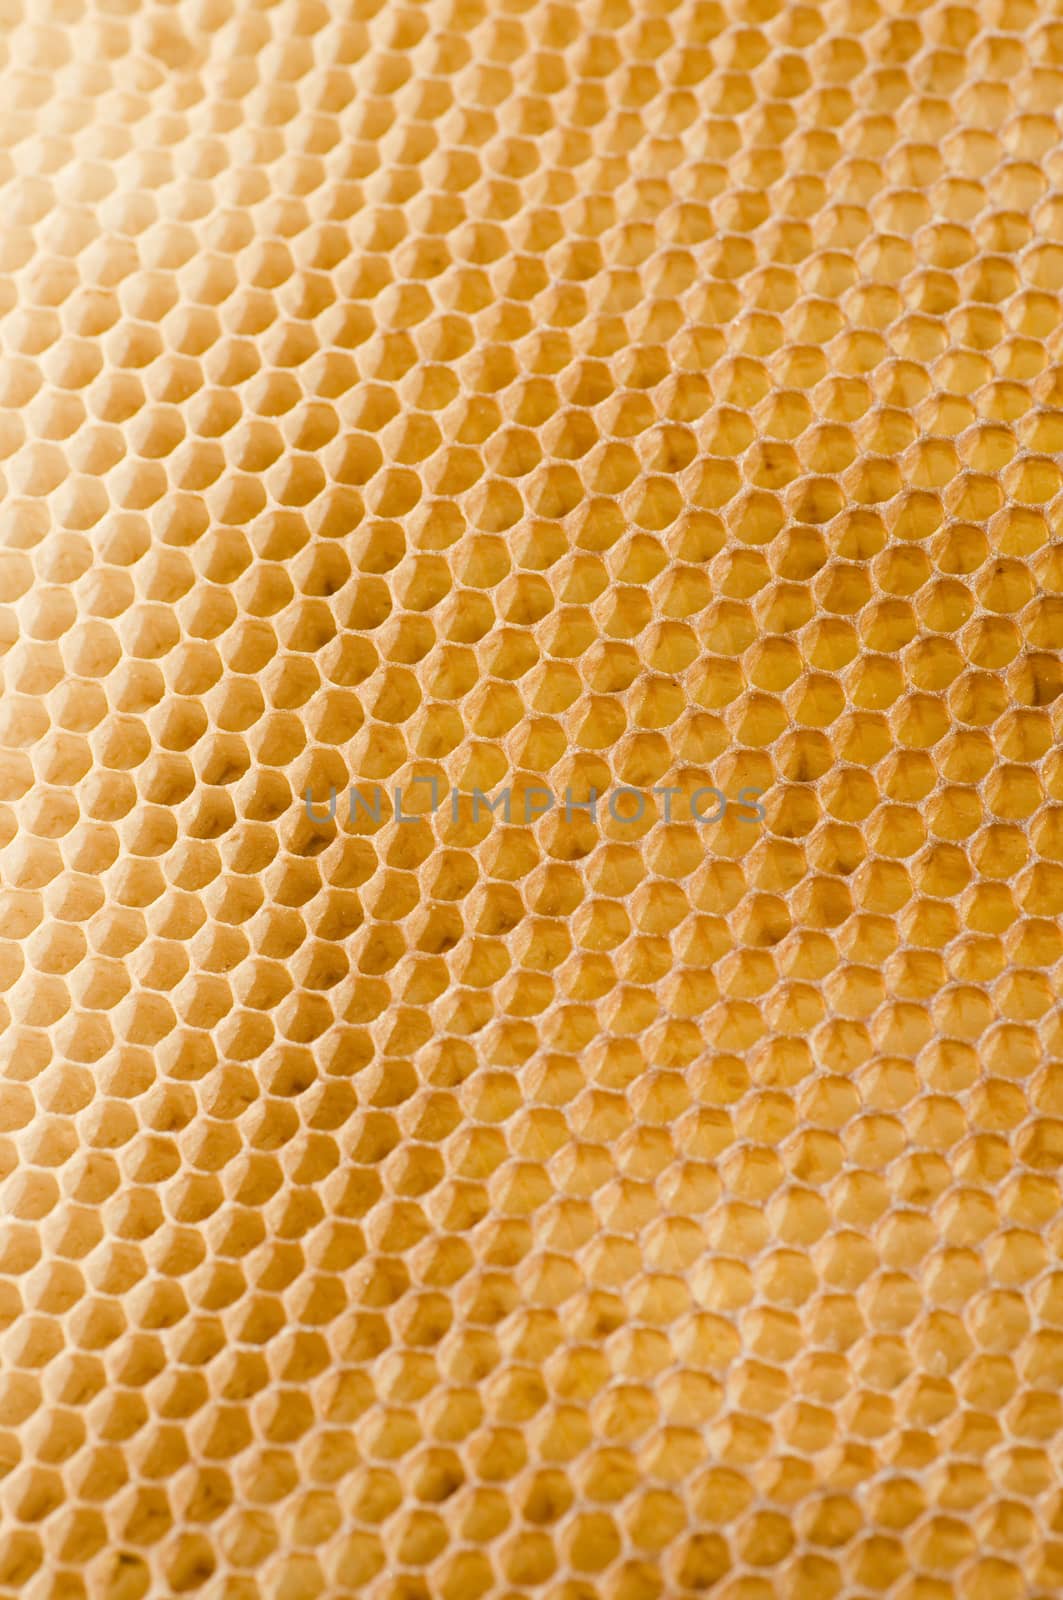 Honeycomb  by Digifoodstock